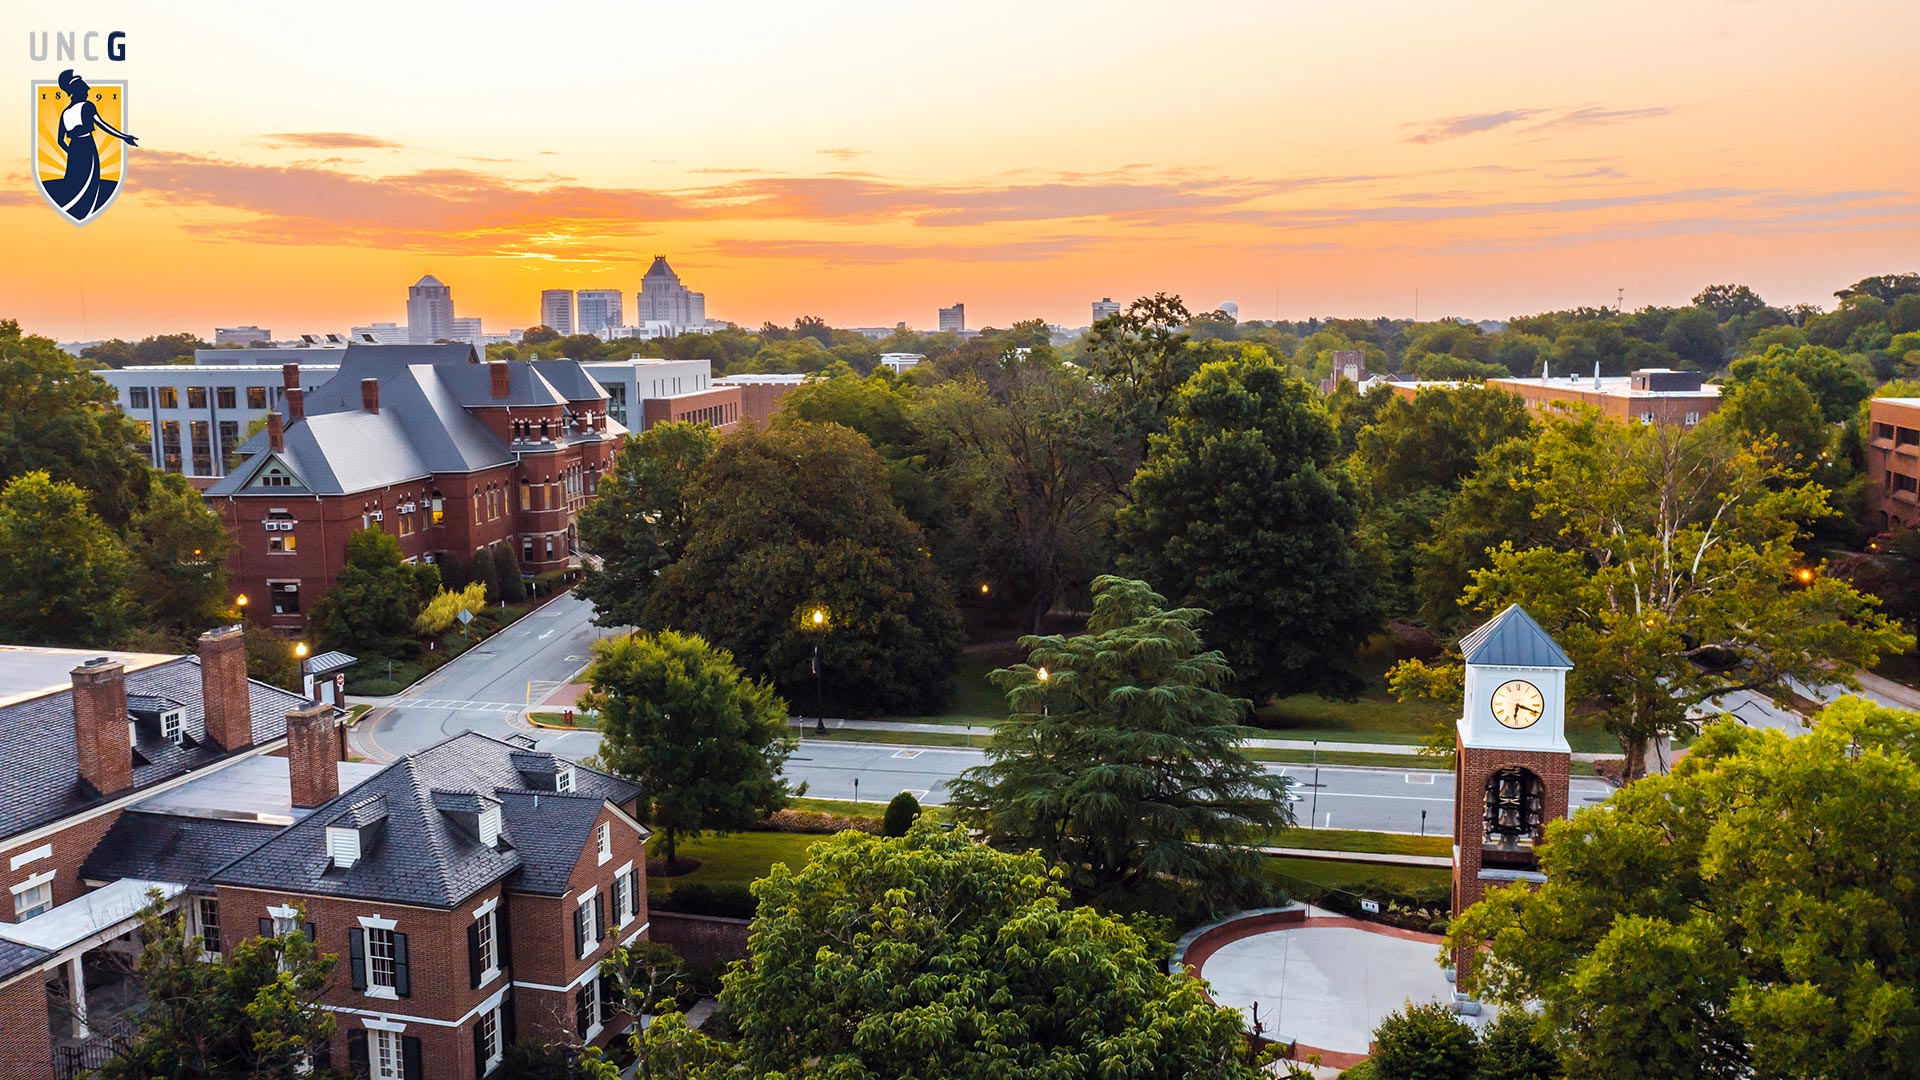 Aerial view over campus showing a sunset in the summer with the UNCG logo in the top left corner